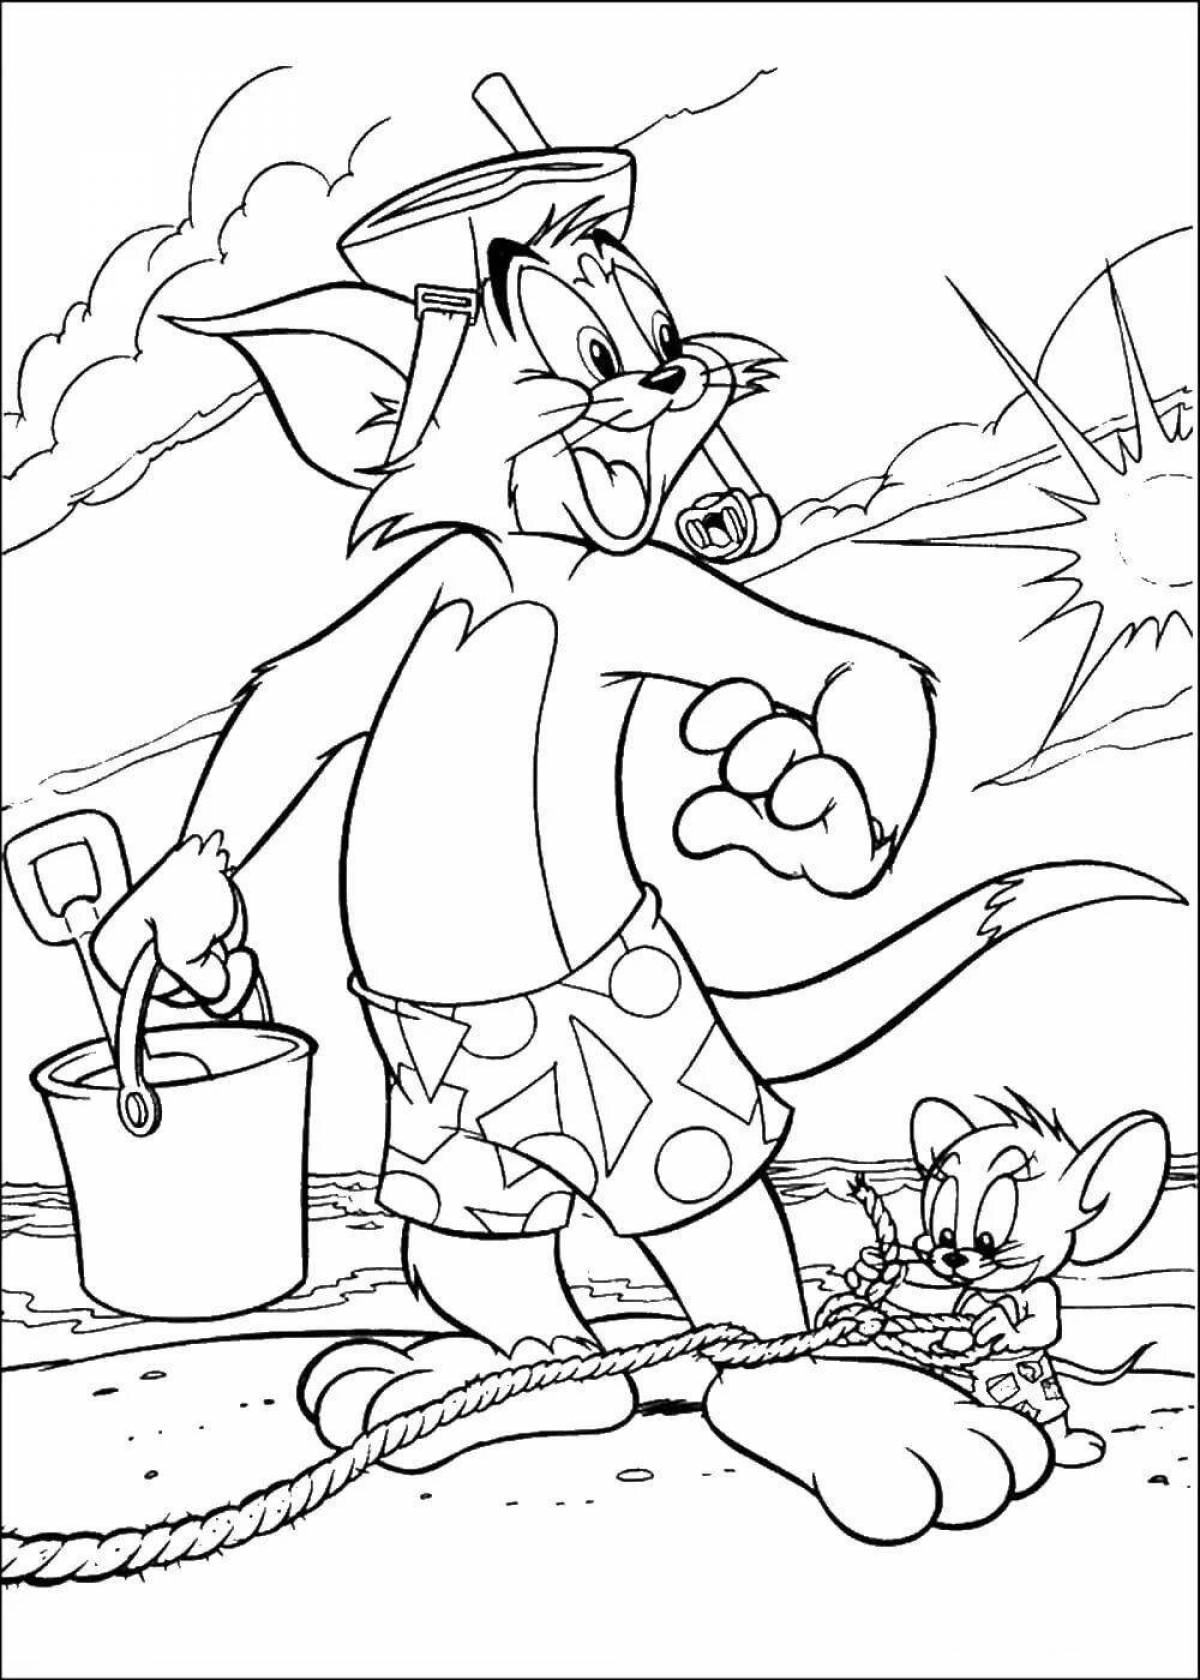 Witty tom and jerry coloring book